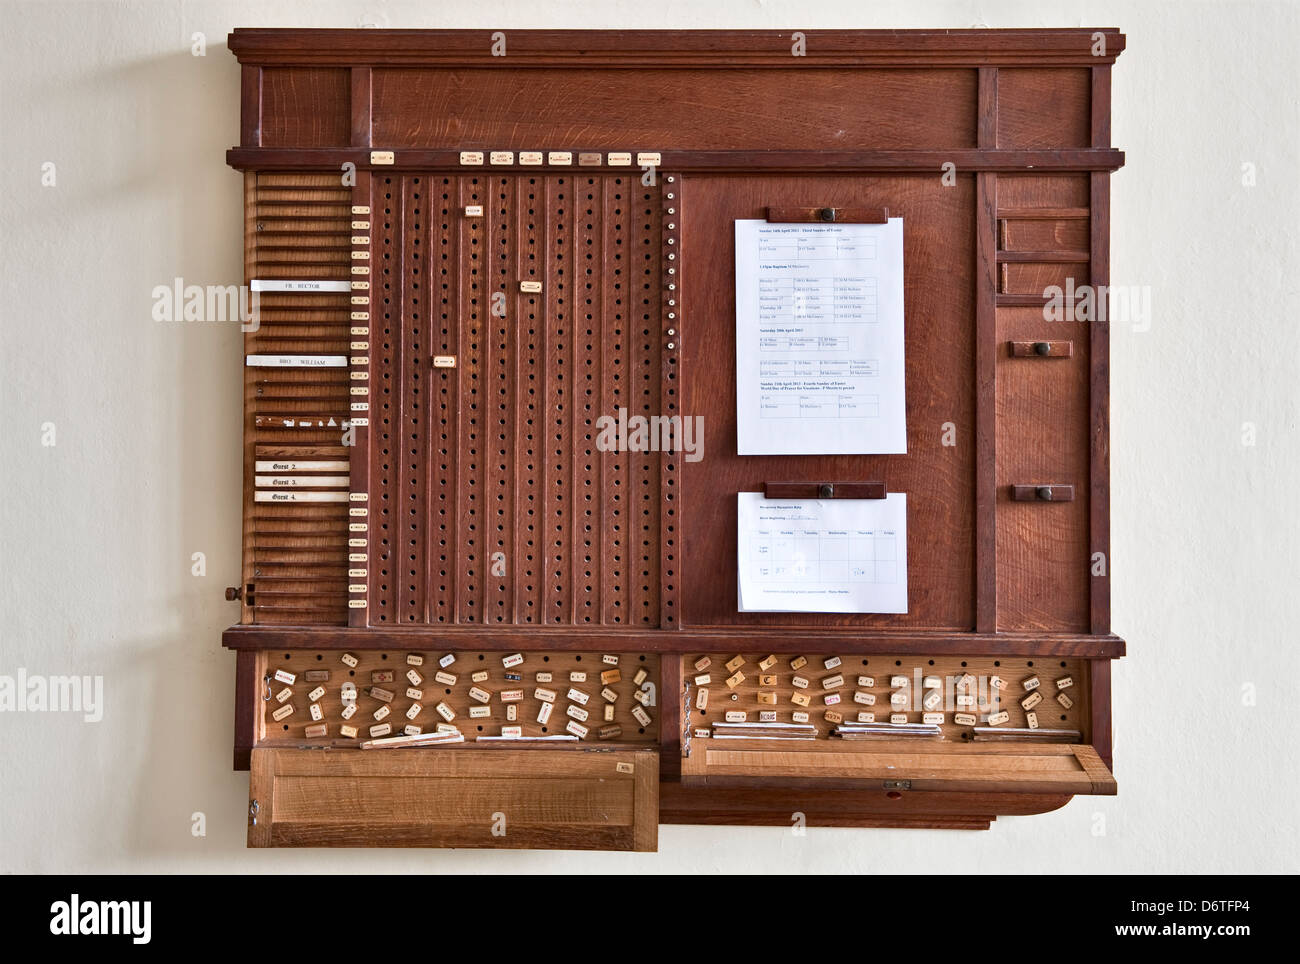 A tabella or daily organiser in a monastery (UK) Stock Photo